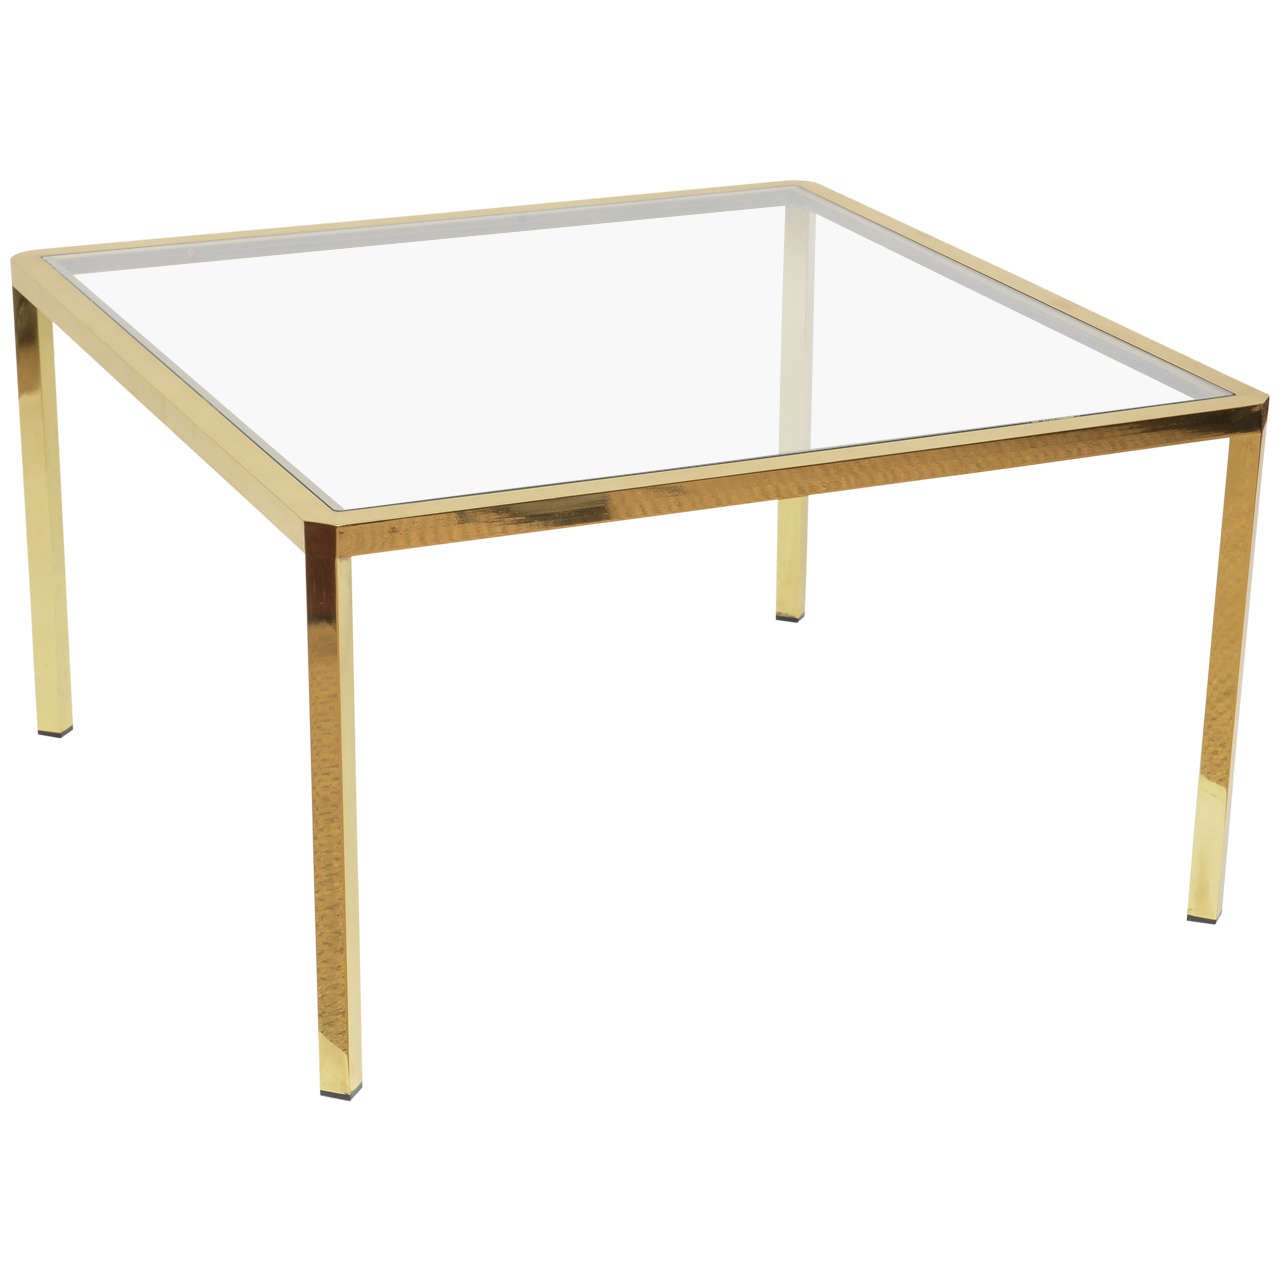 Mid- Century Modern Square Brass Glass Coffee Table from Italy